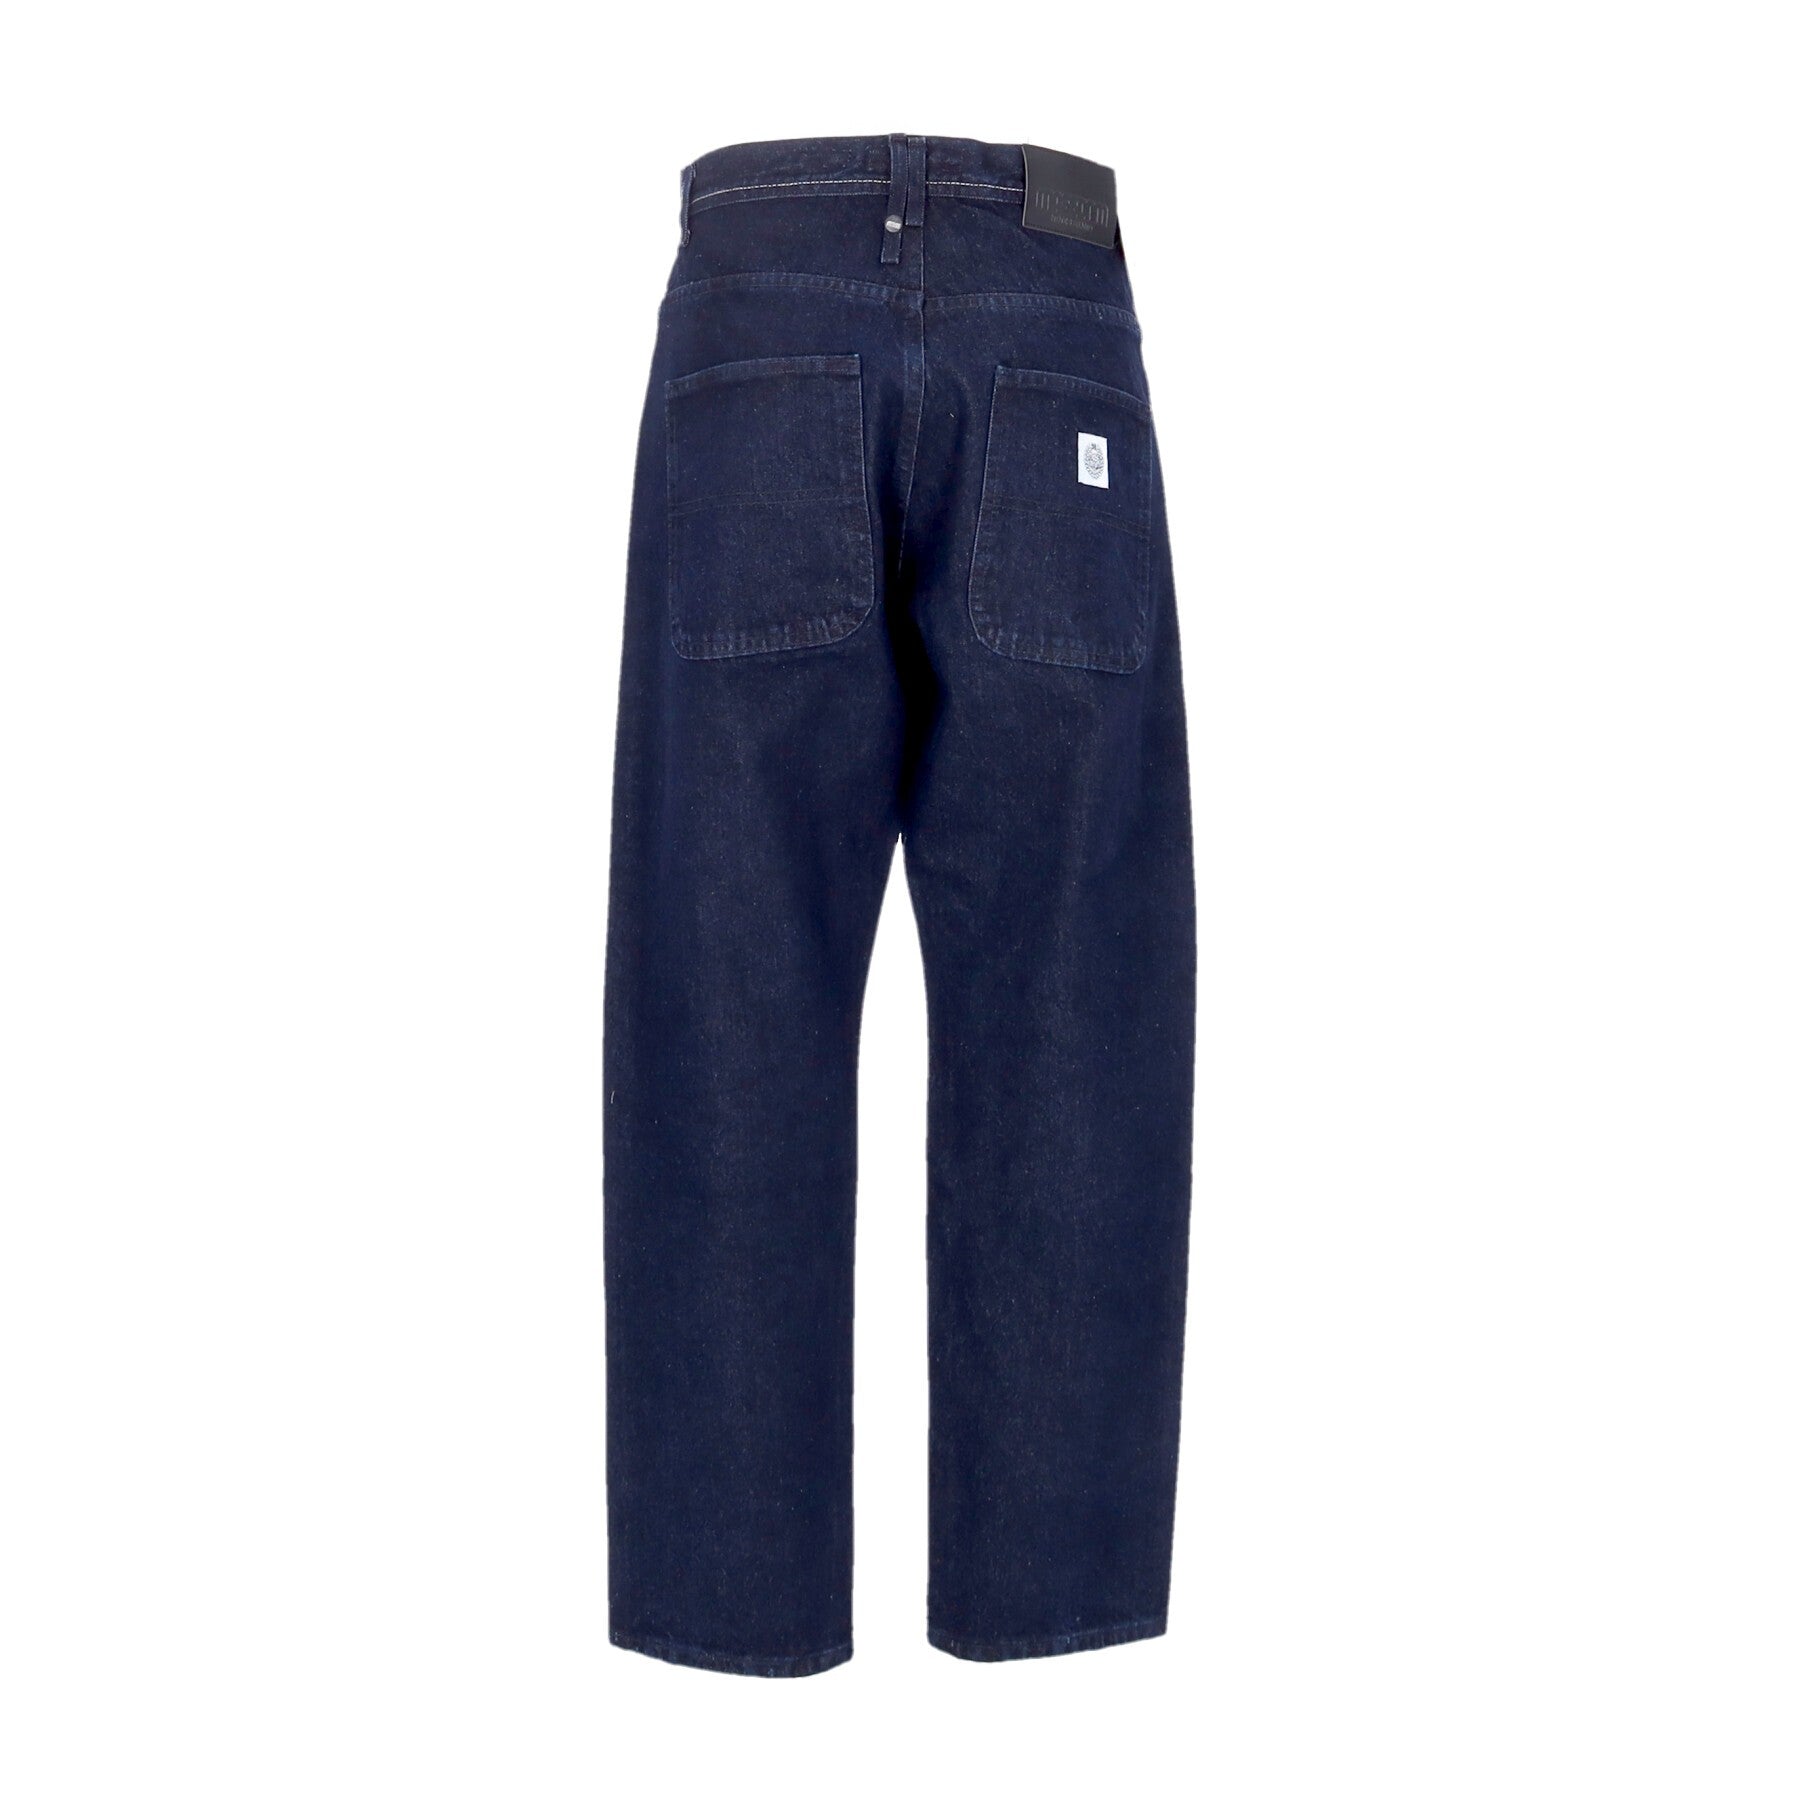 Men's Jeans Craft Baggy Jeans Rinse